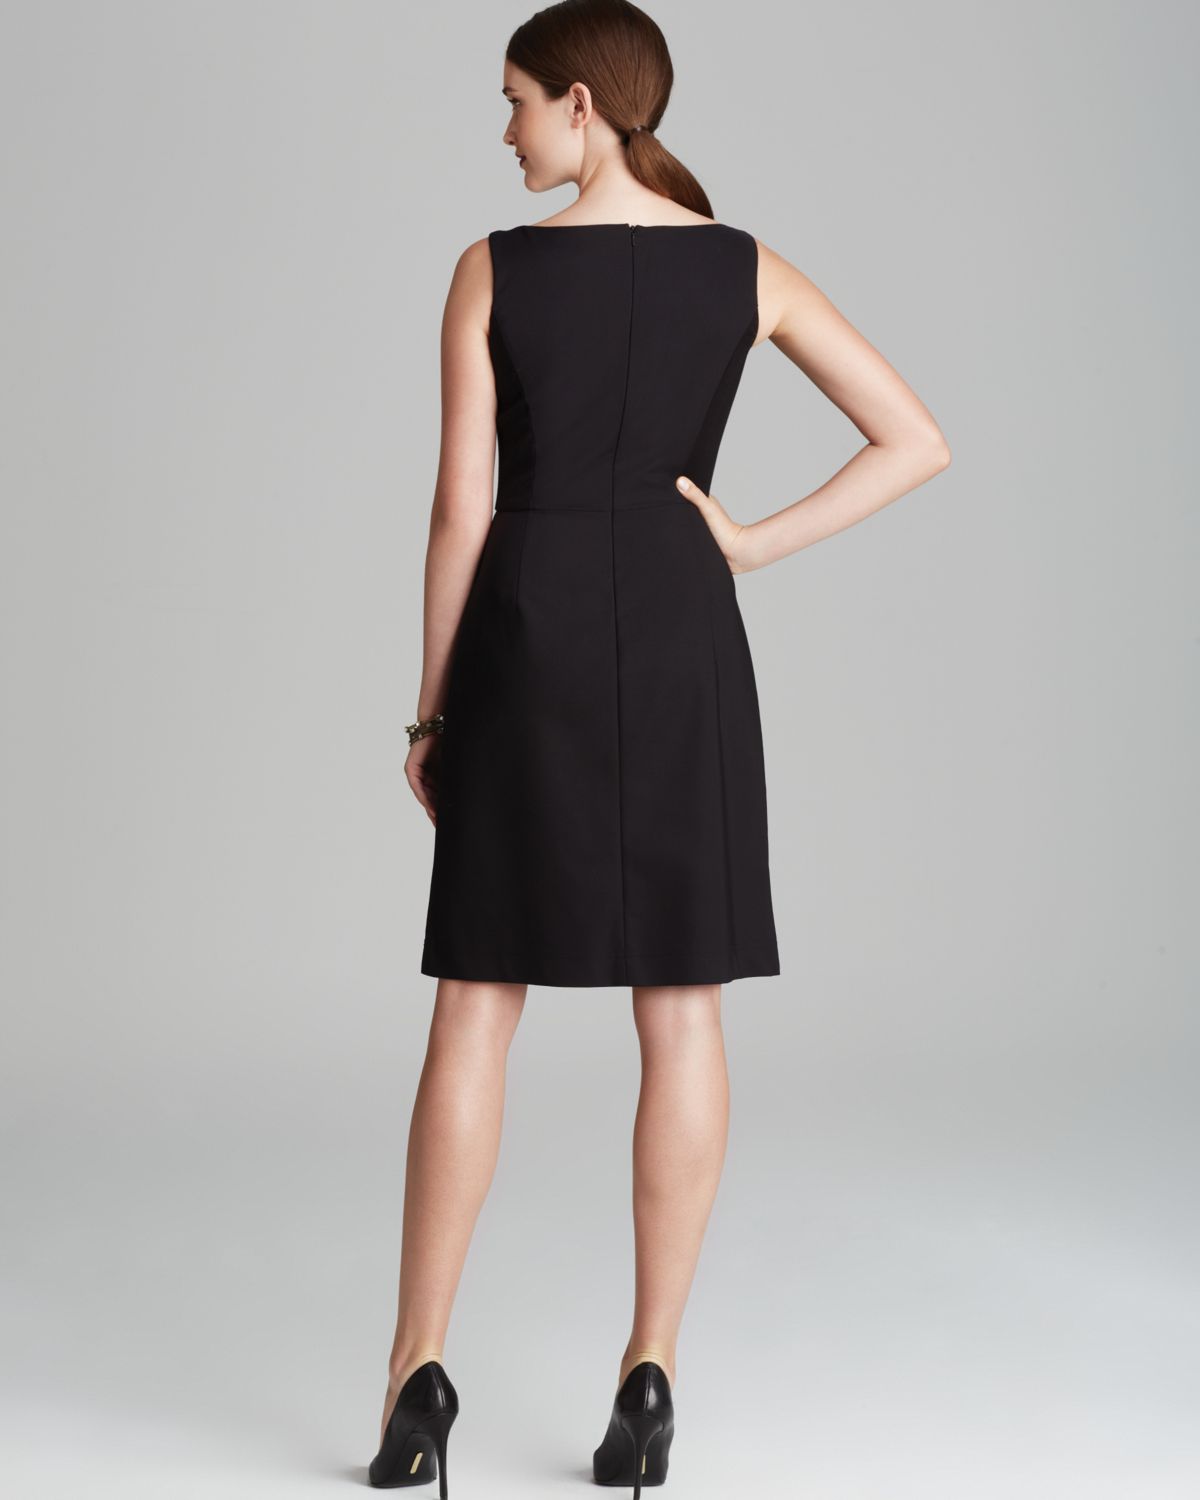 Lyst - French Connection Dress Gorgeous Grace in Black